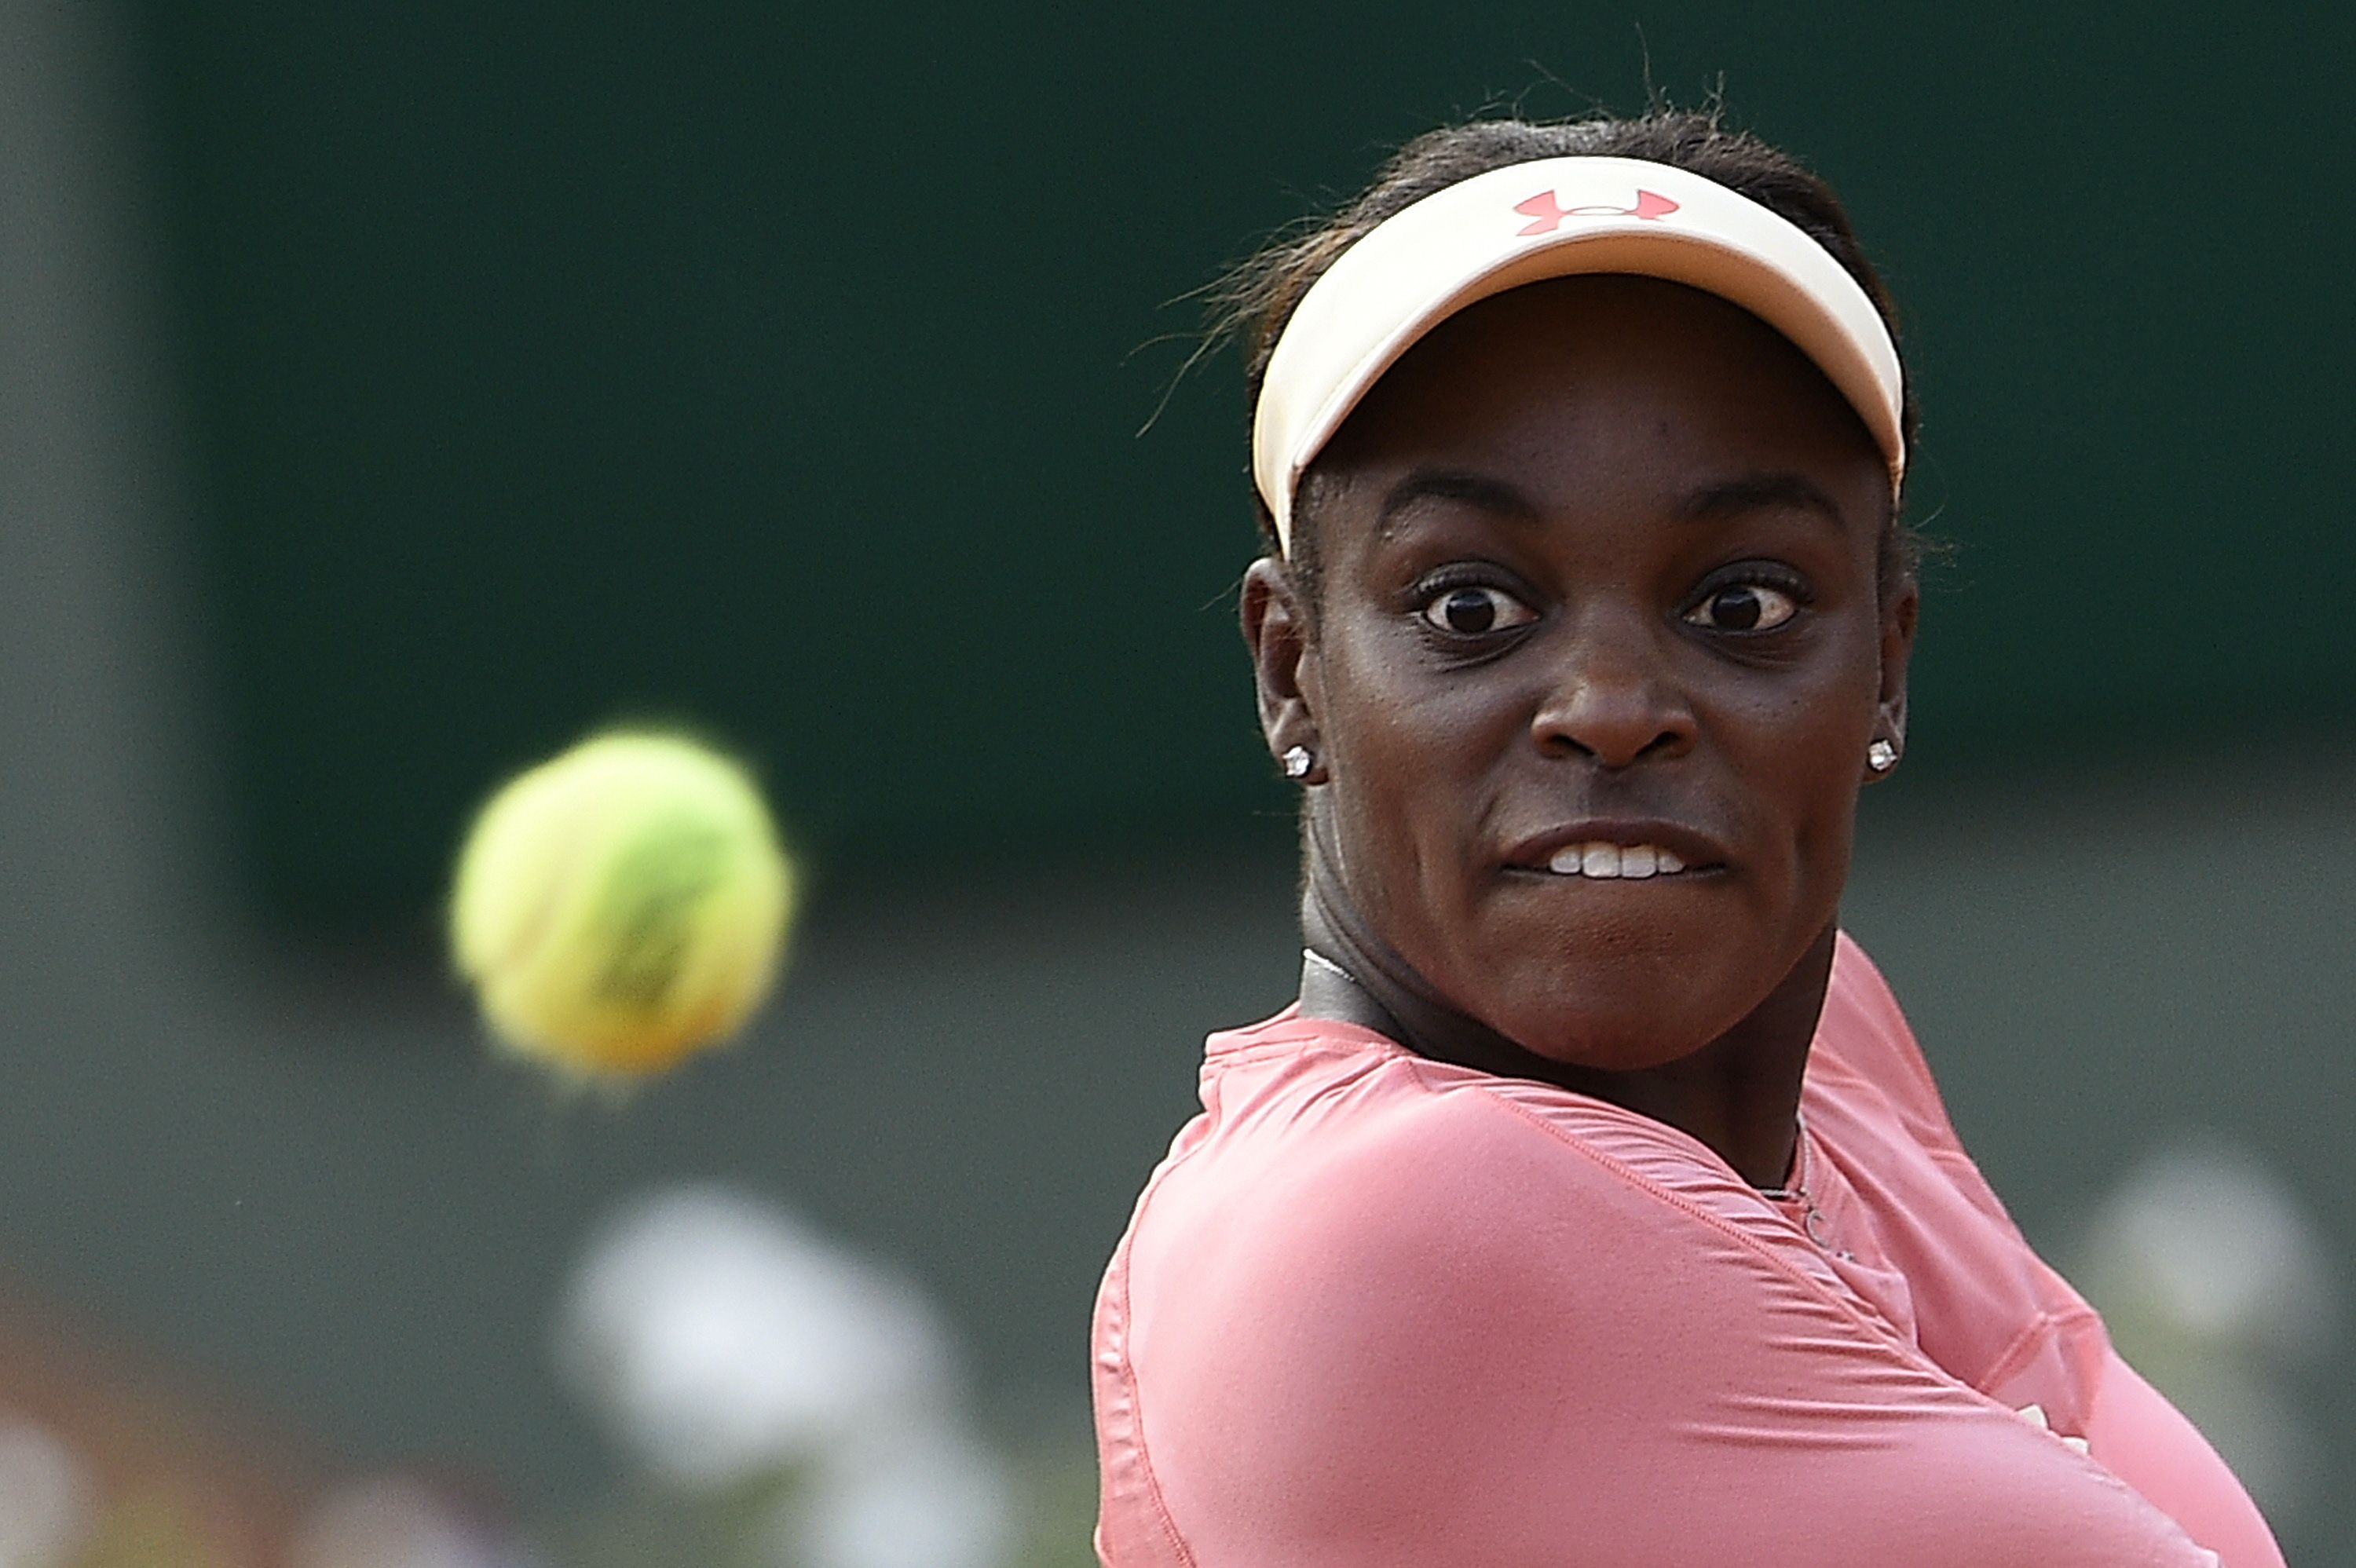 Sloane Stephens is all focus as she makes a return during her straight-sets victory over compatriot Venus Williams in the first round of the French Open. Photo: AFP